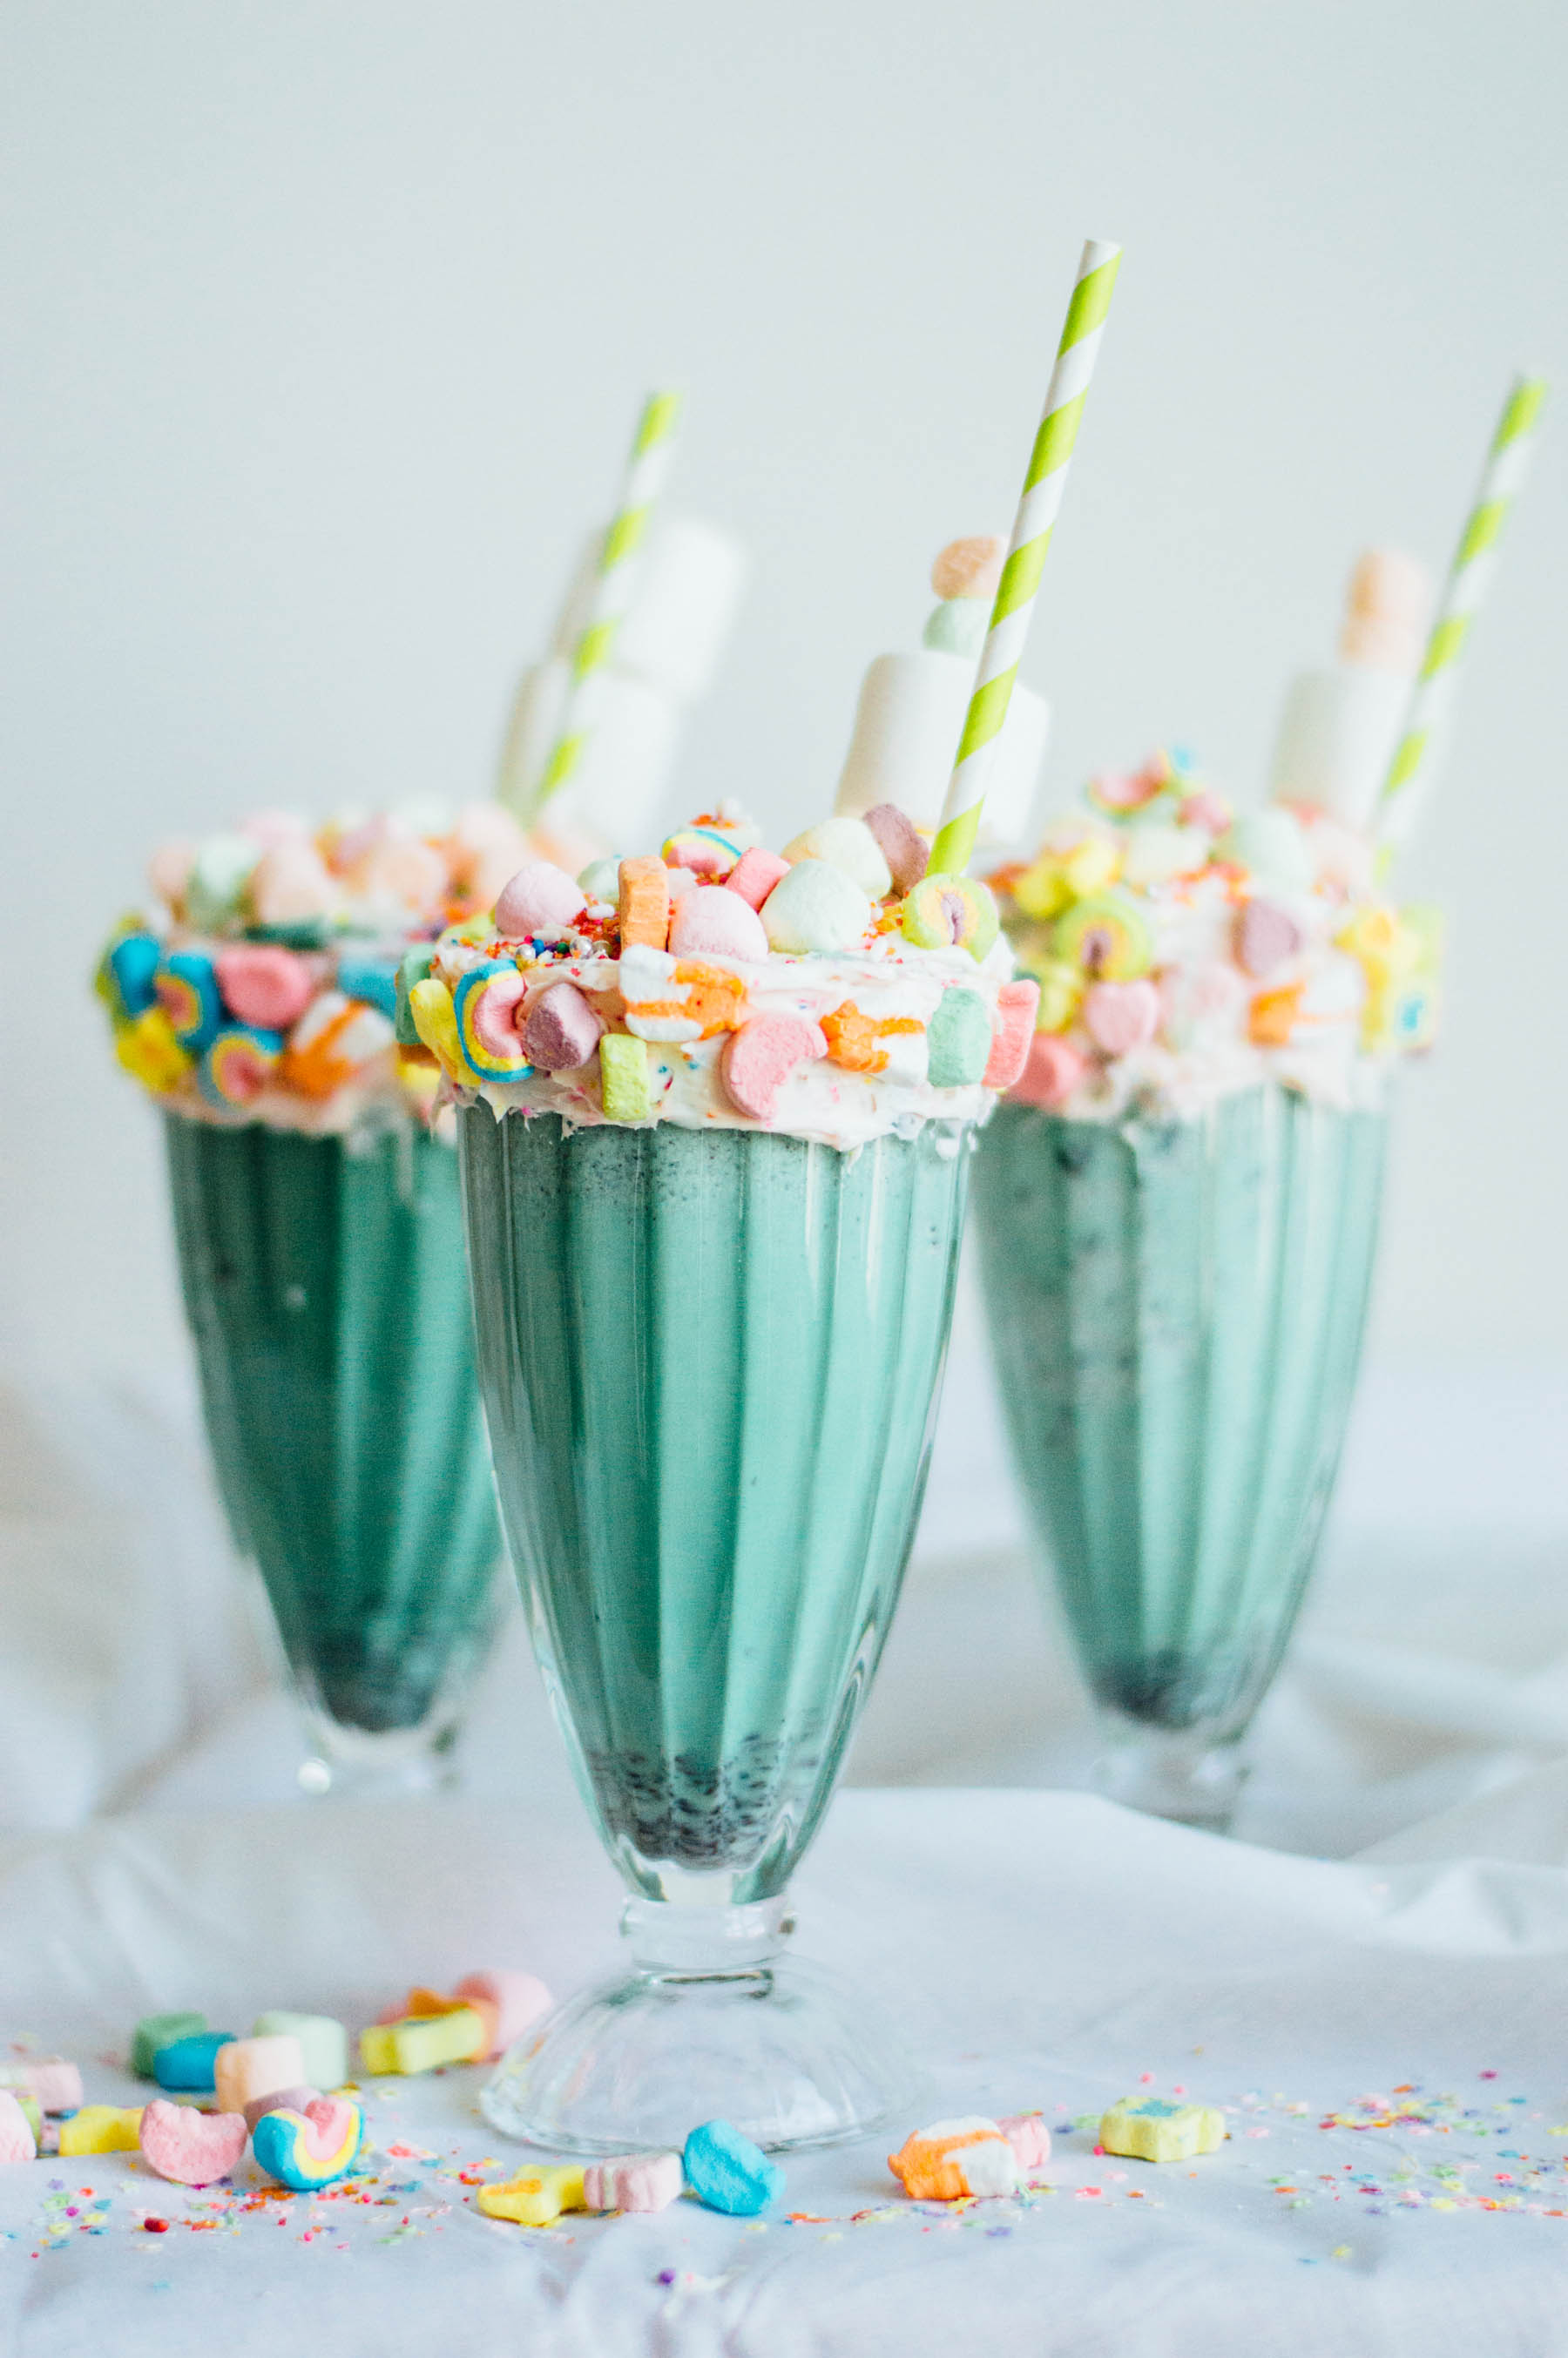 Lucky Charms Milkshake for the festive St. Patrick's Day weekend! | bygabriella.co